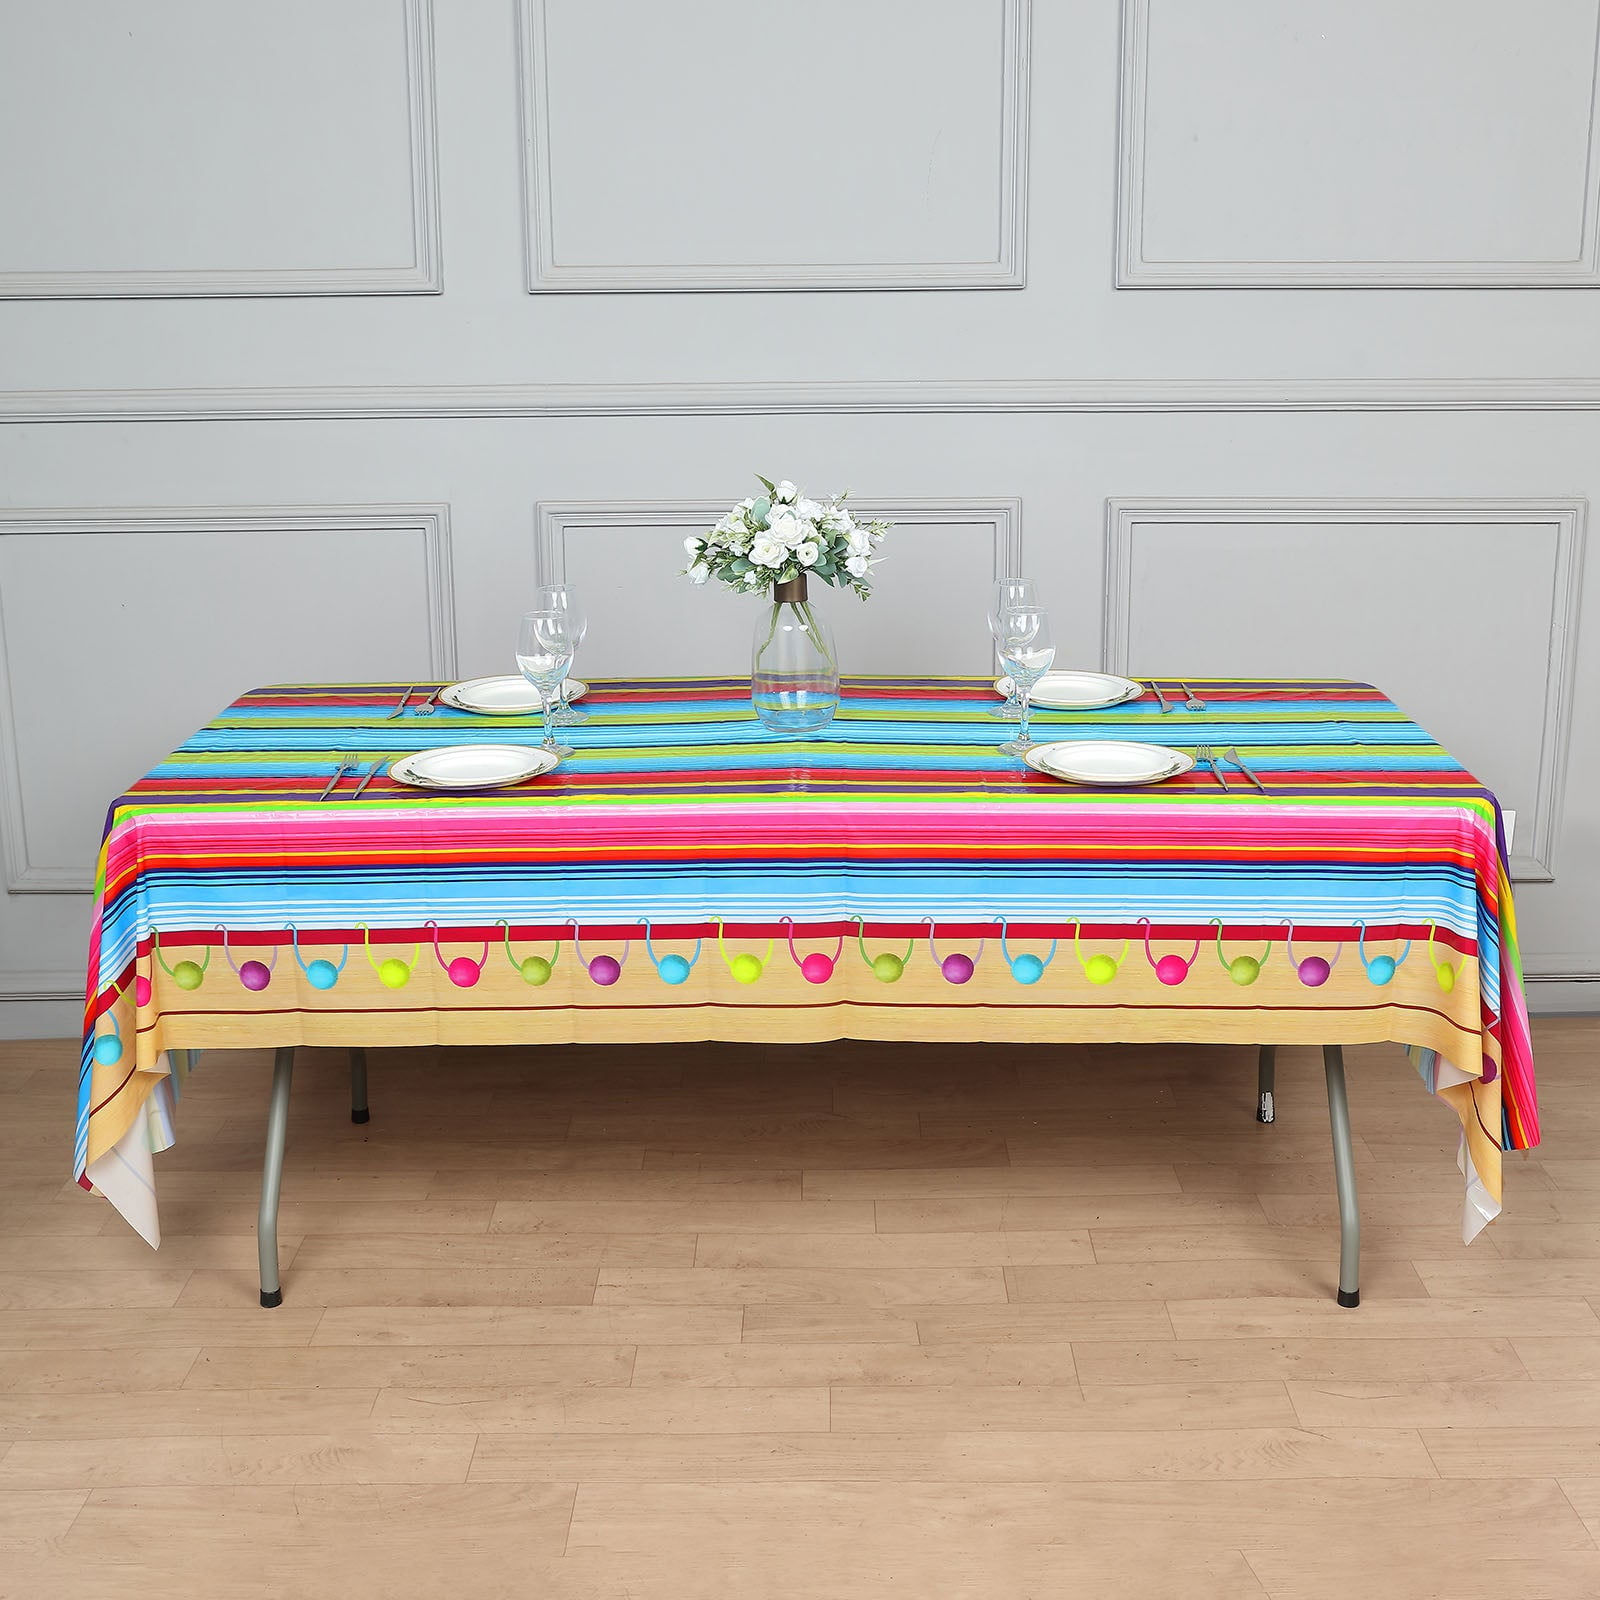 3 Pack Fiesta Table Cover, Cinco de Mayo, Mexican Party Supplies (54 x 108 in)